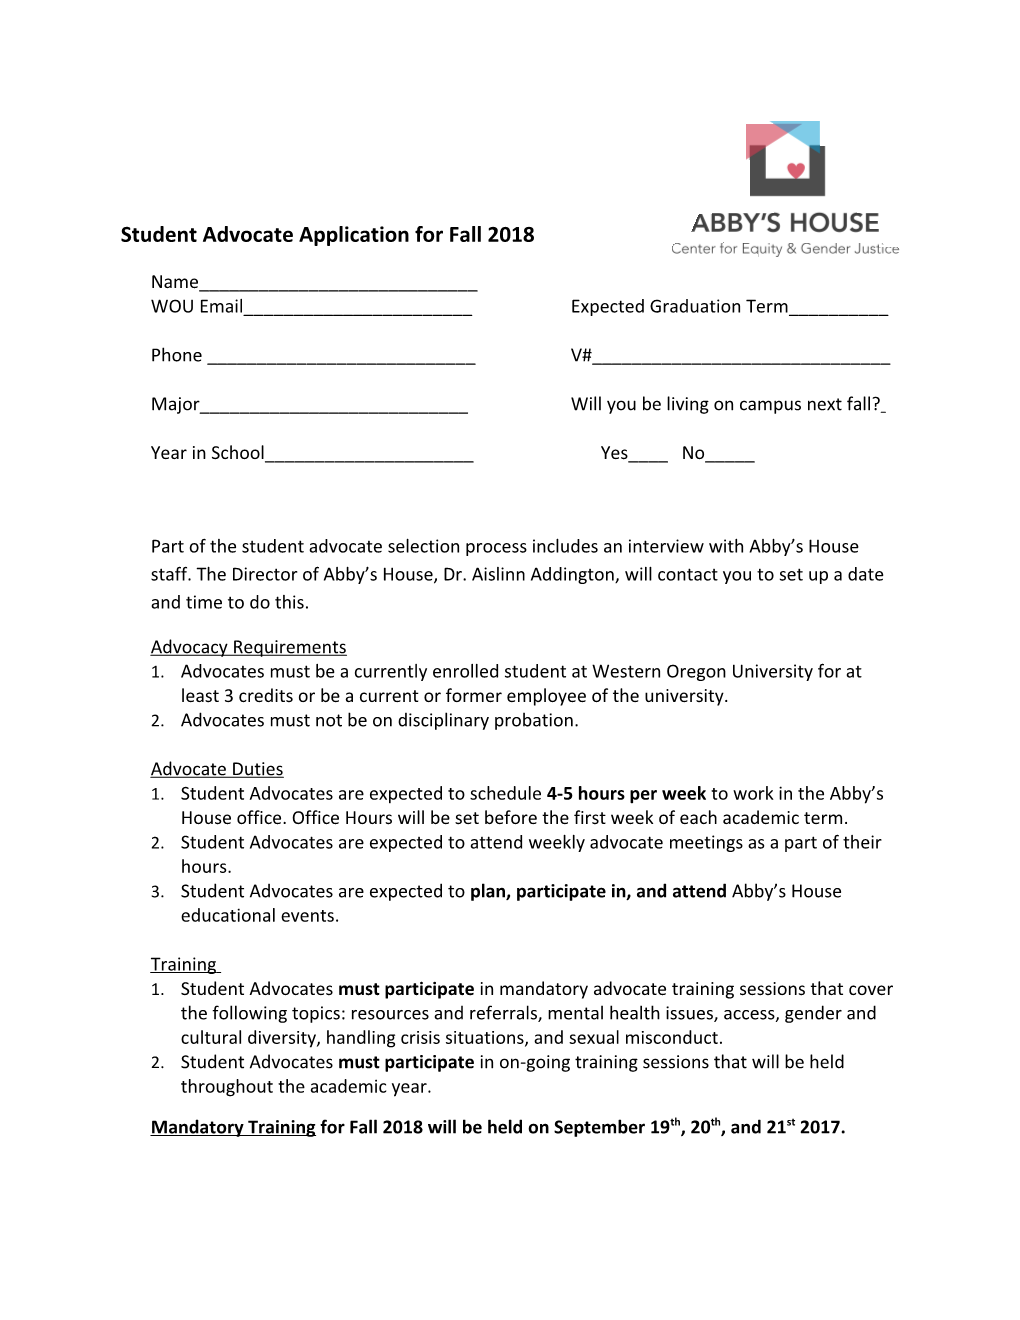 Student Advocate Application for Fall 2018